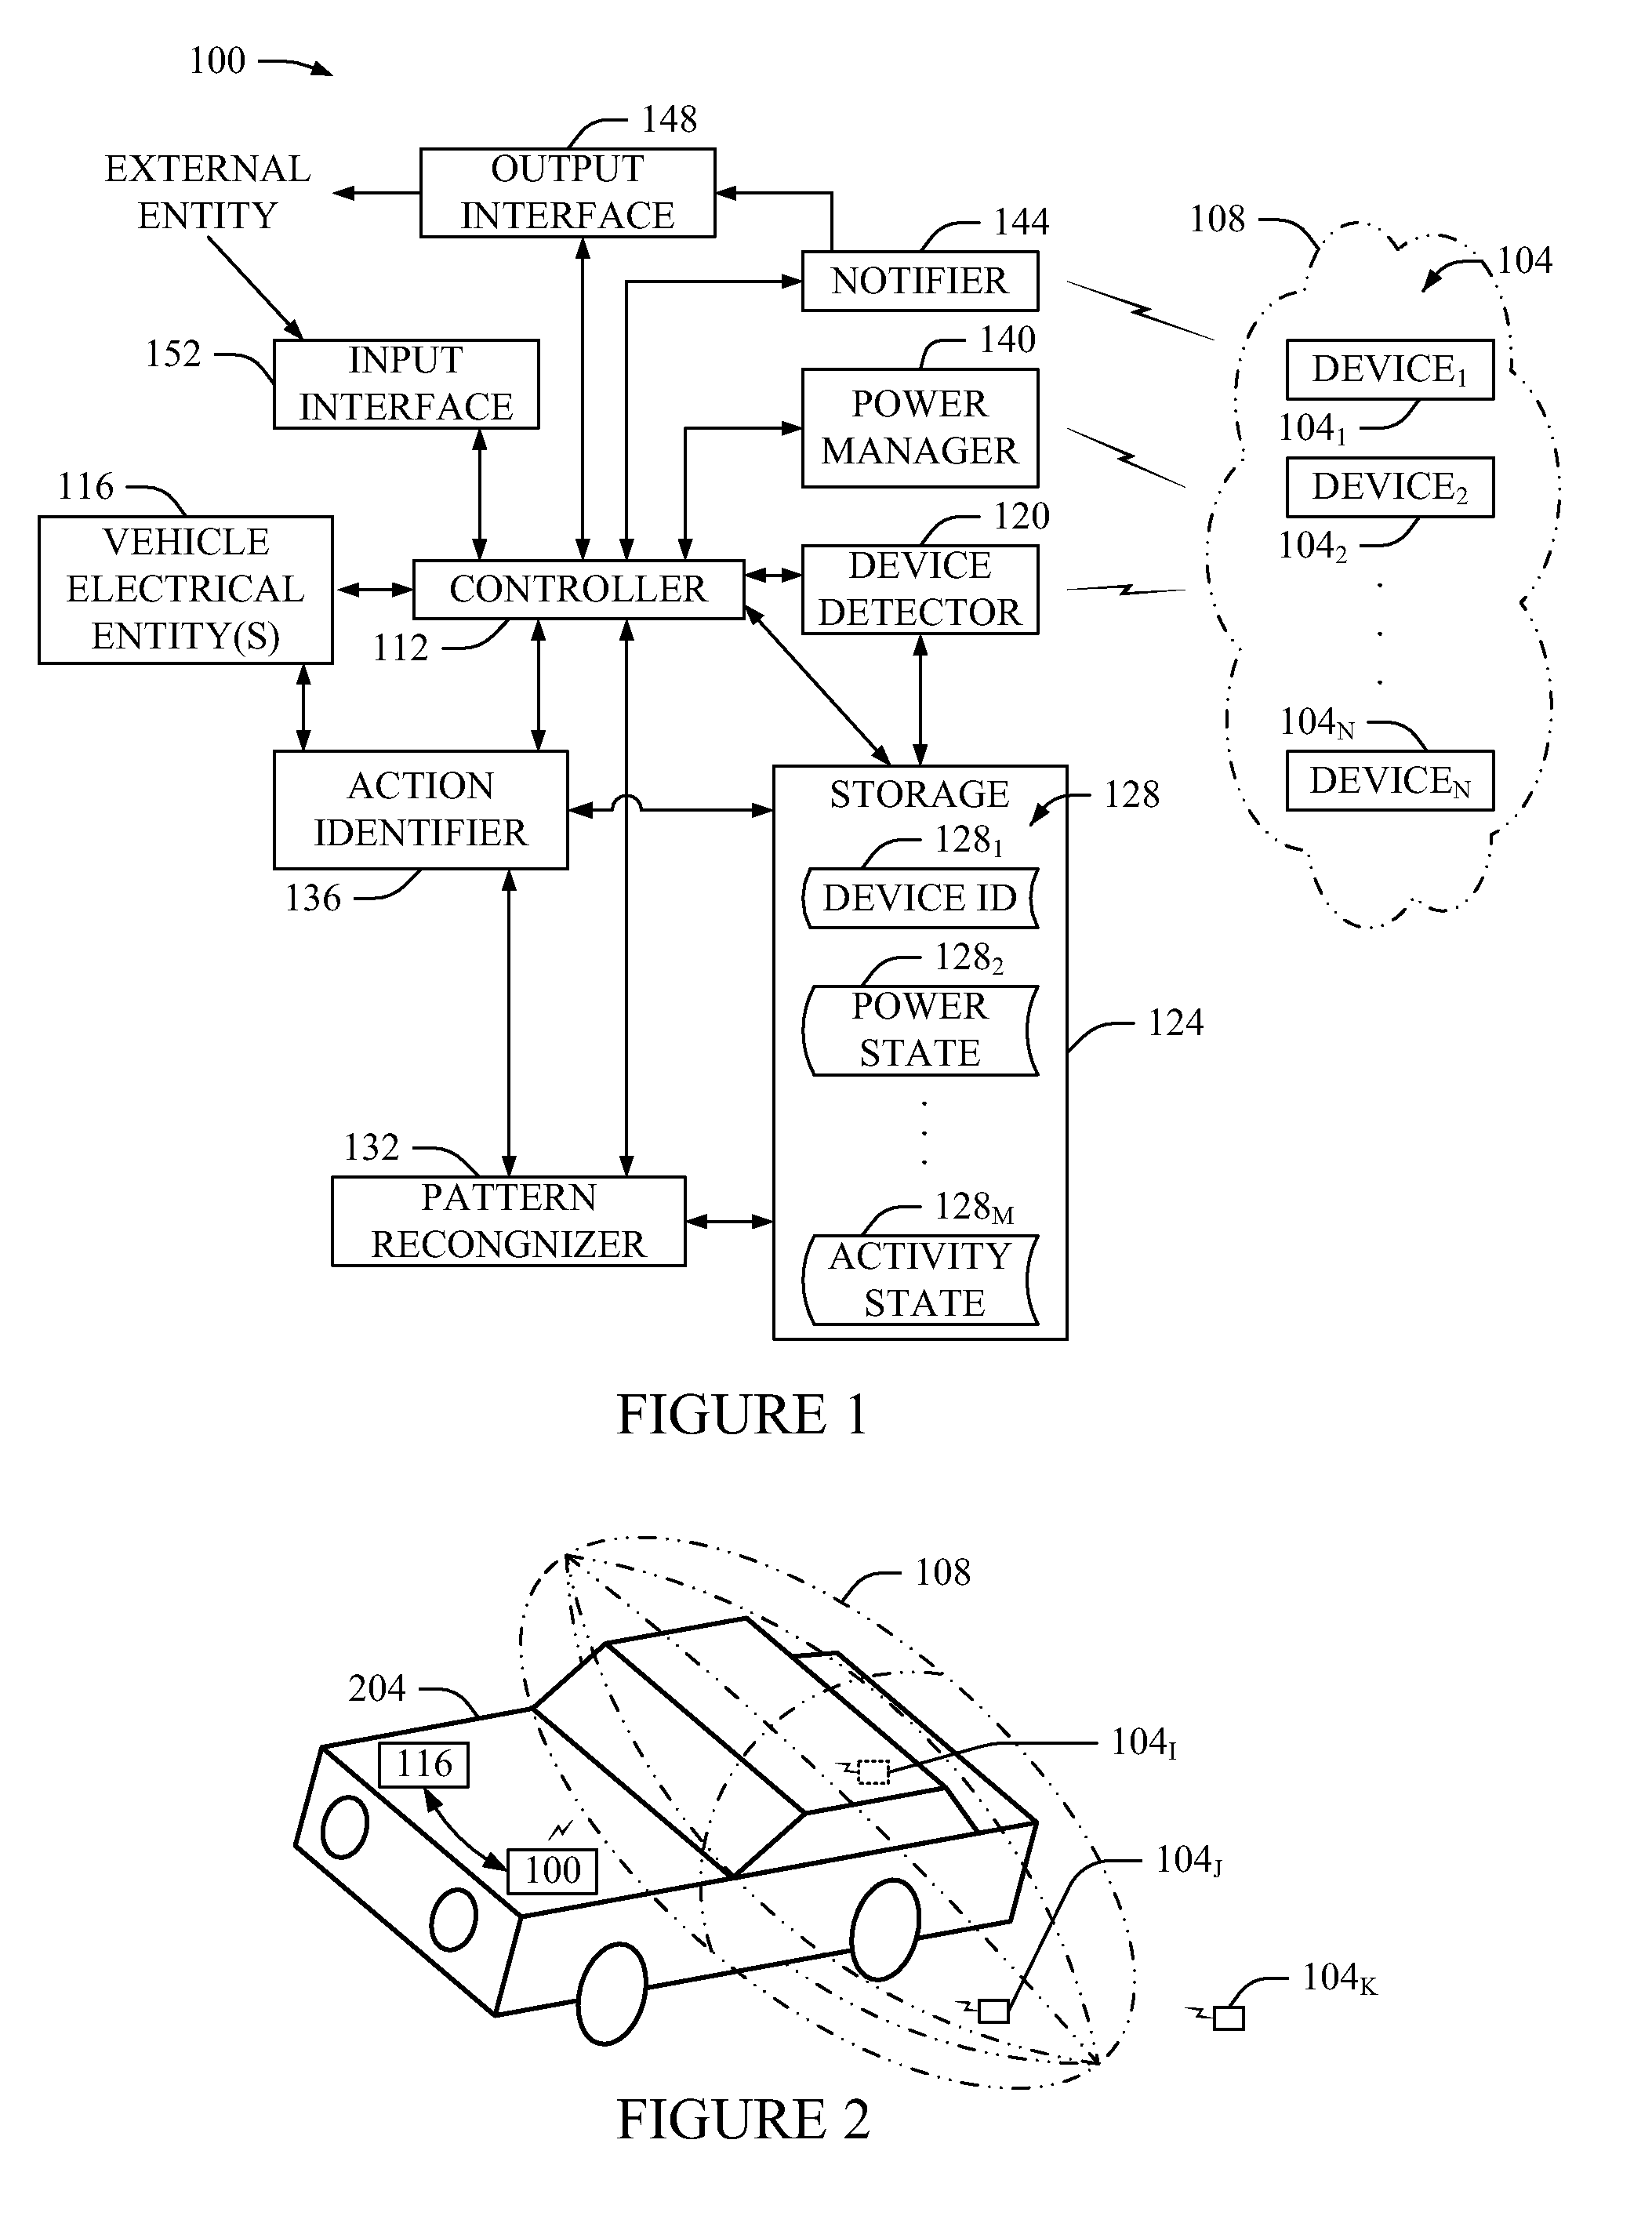 Managing electrical device power state